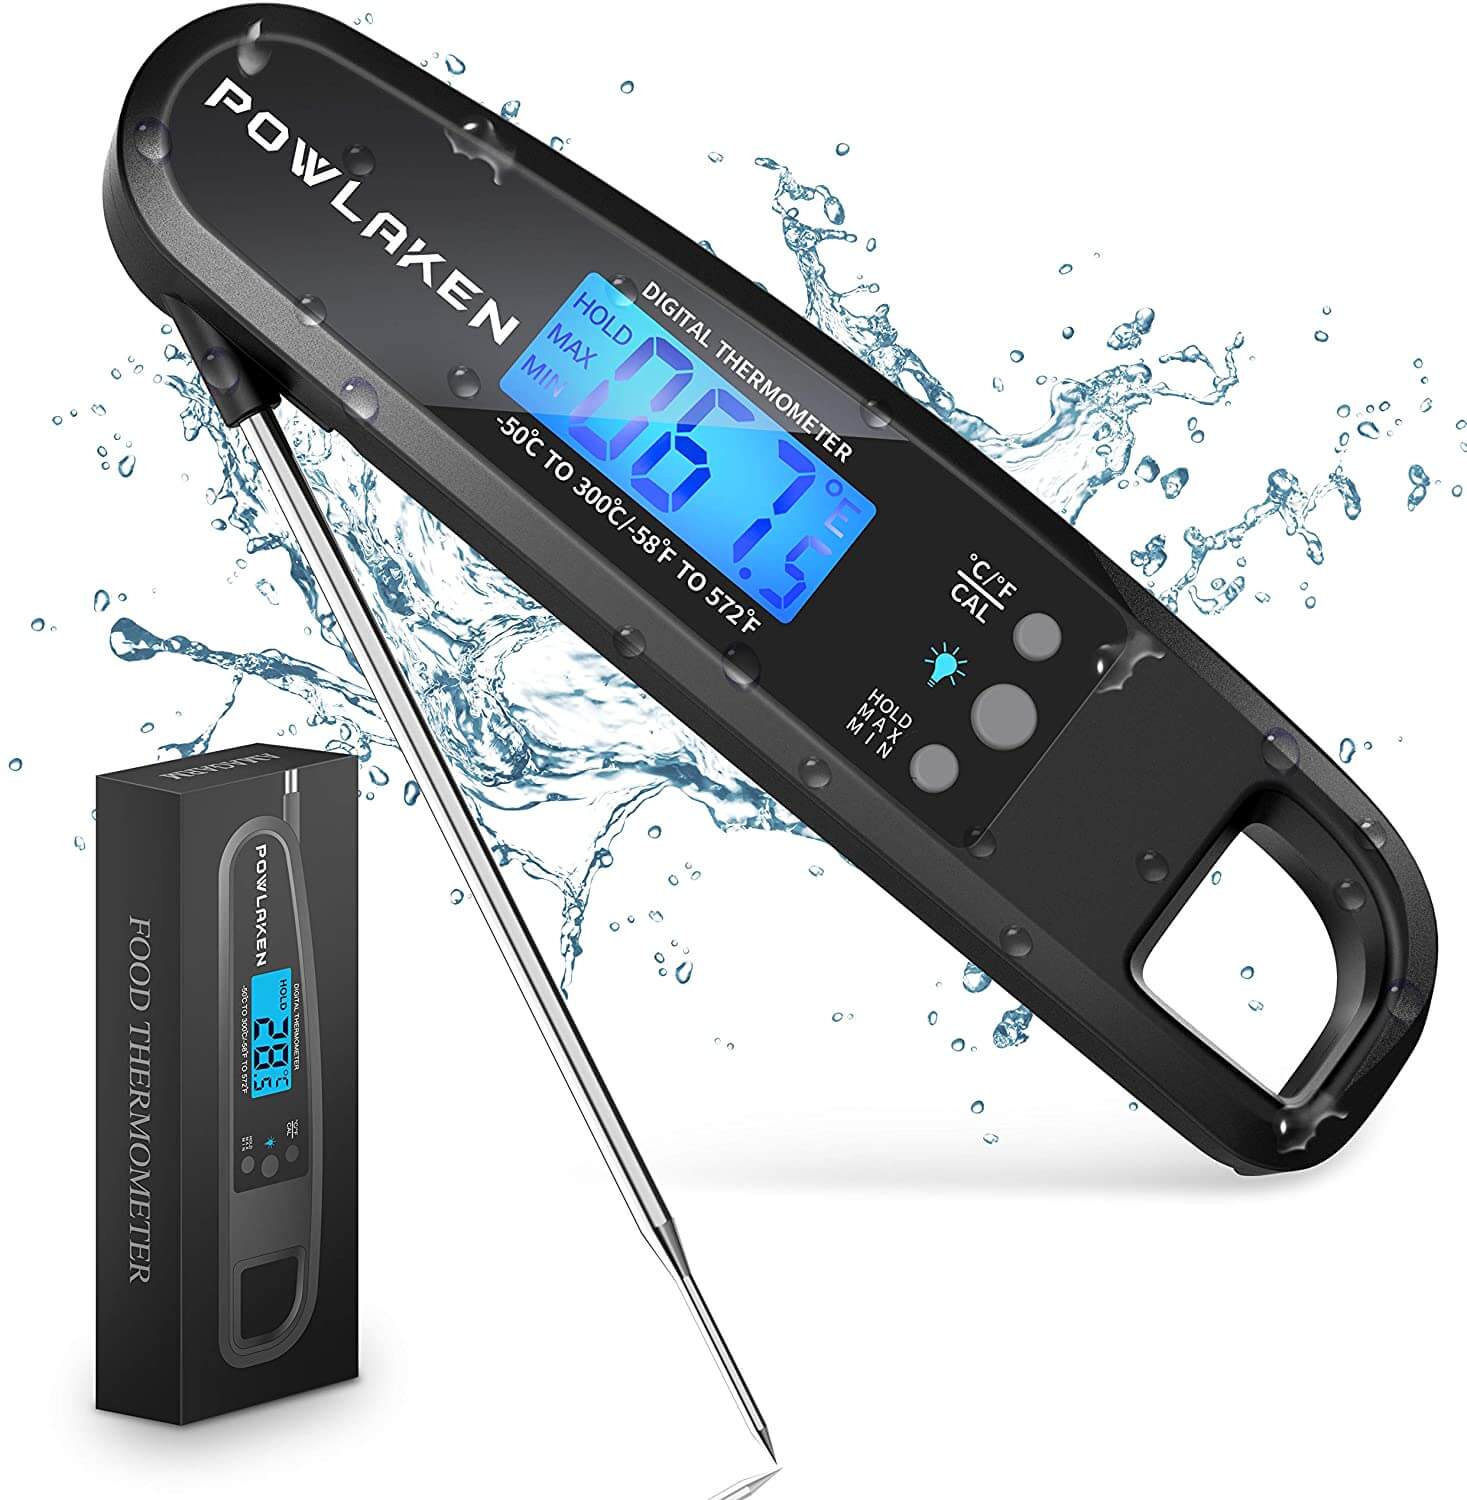 Powlaken Meat Food Thermometer